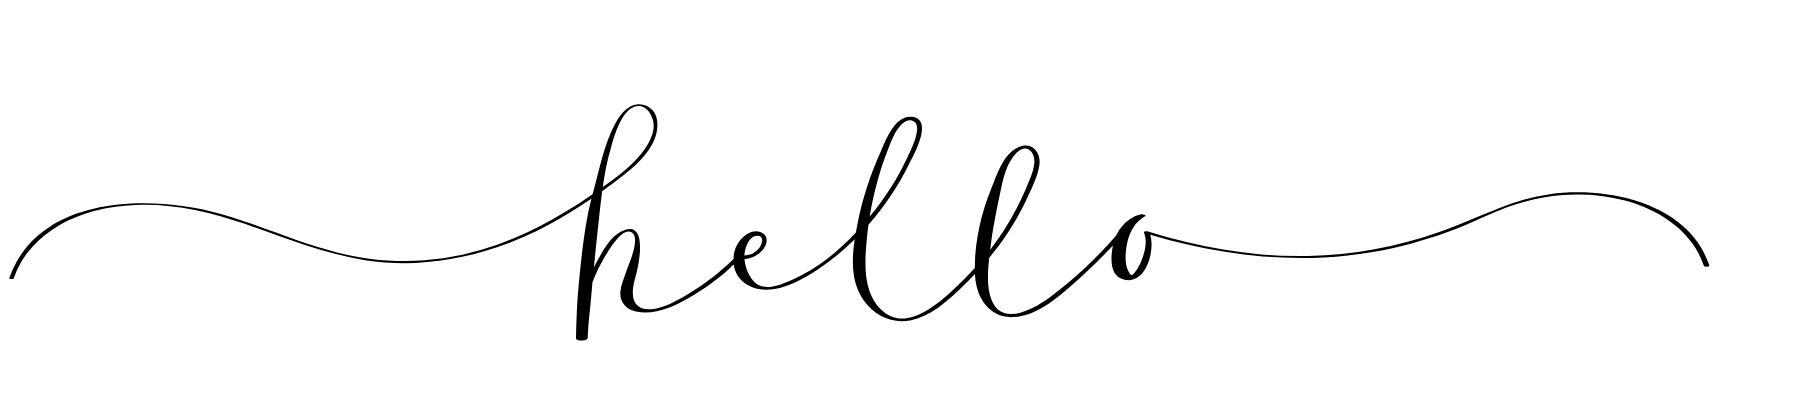 font style - hello